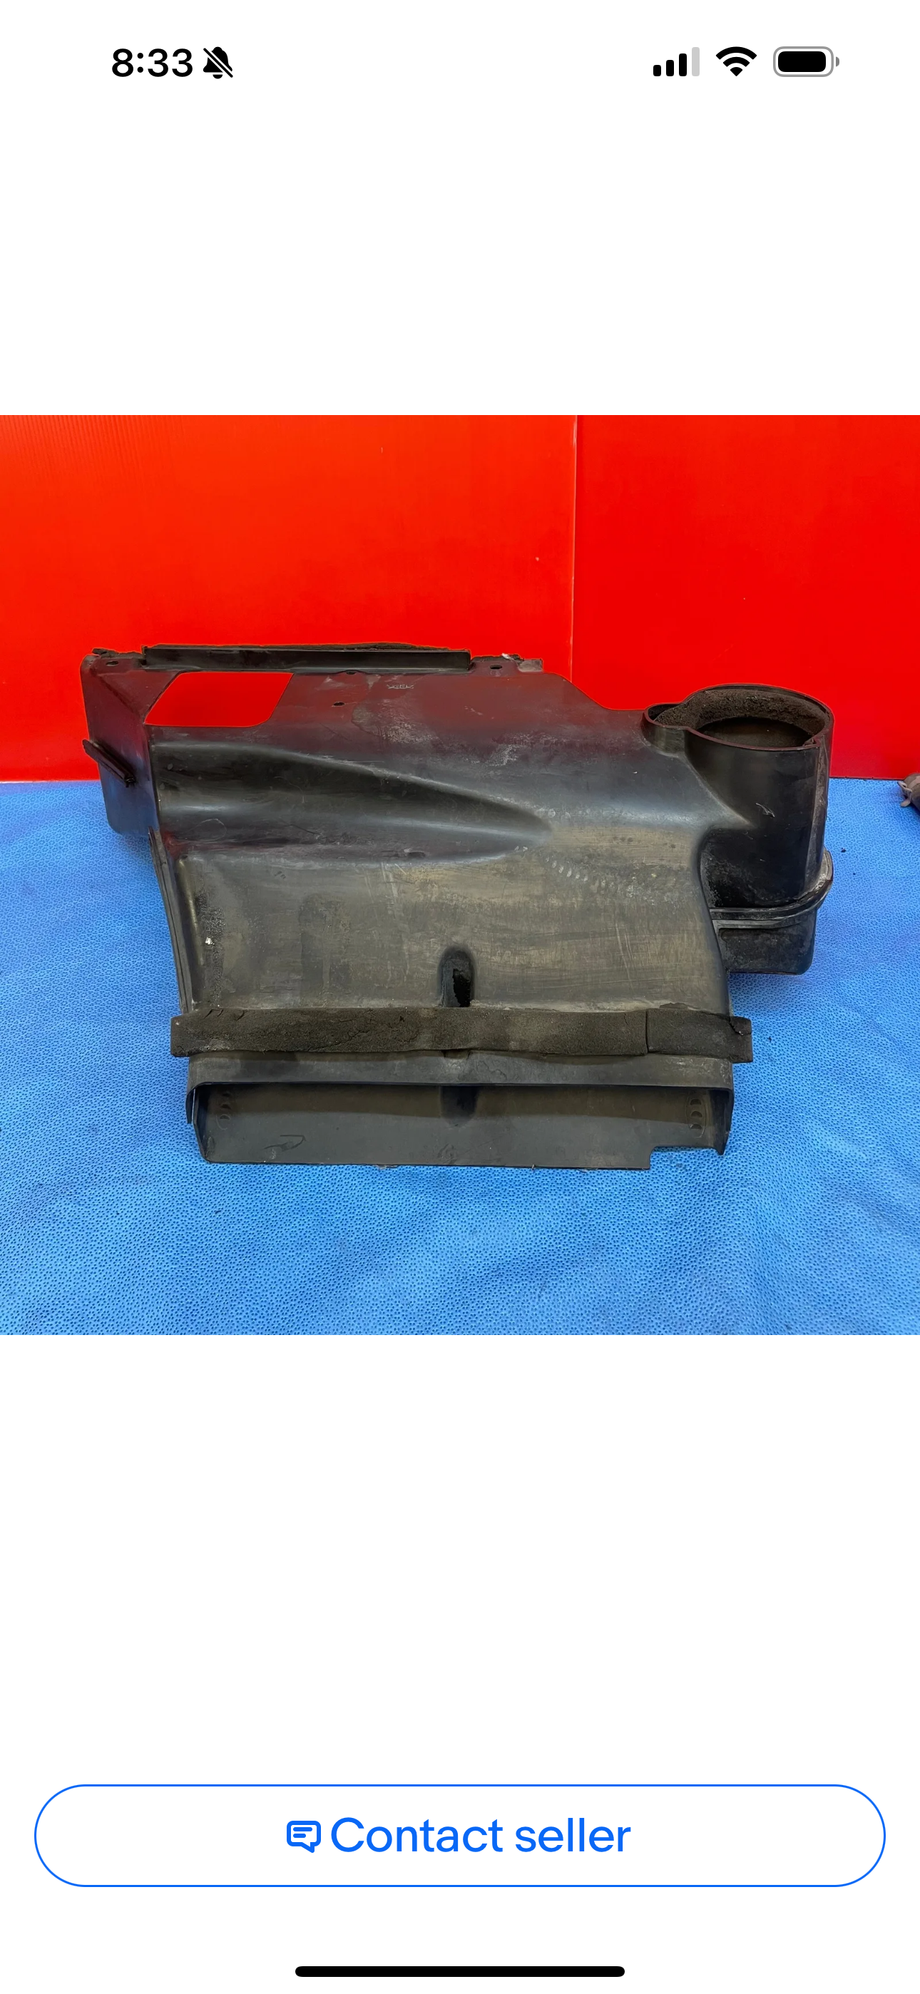 Engine - Intake/Fuel - WTB - stock intercooler duct - Used - 1993 to 1995 Mazda RX-7 - Allentown, PA 18031, United States